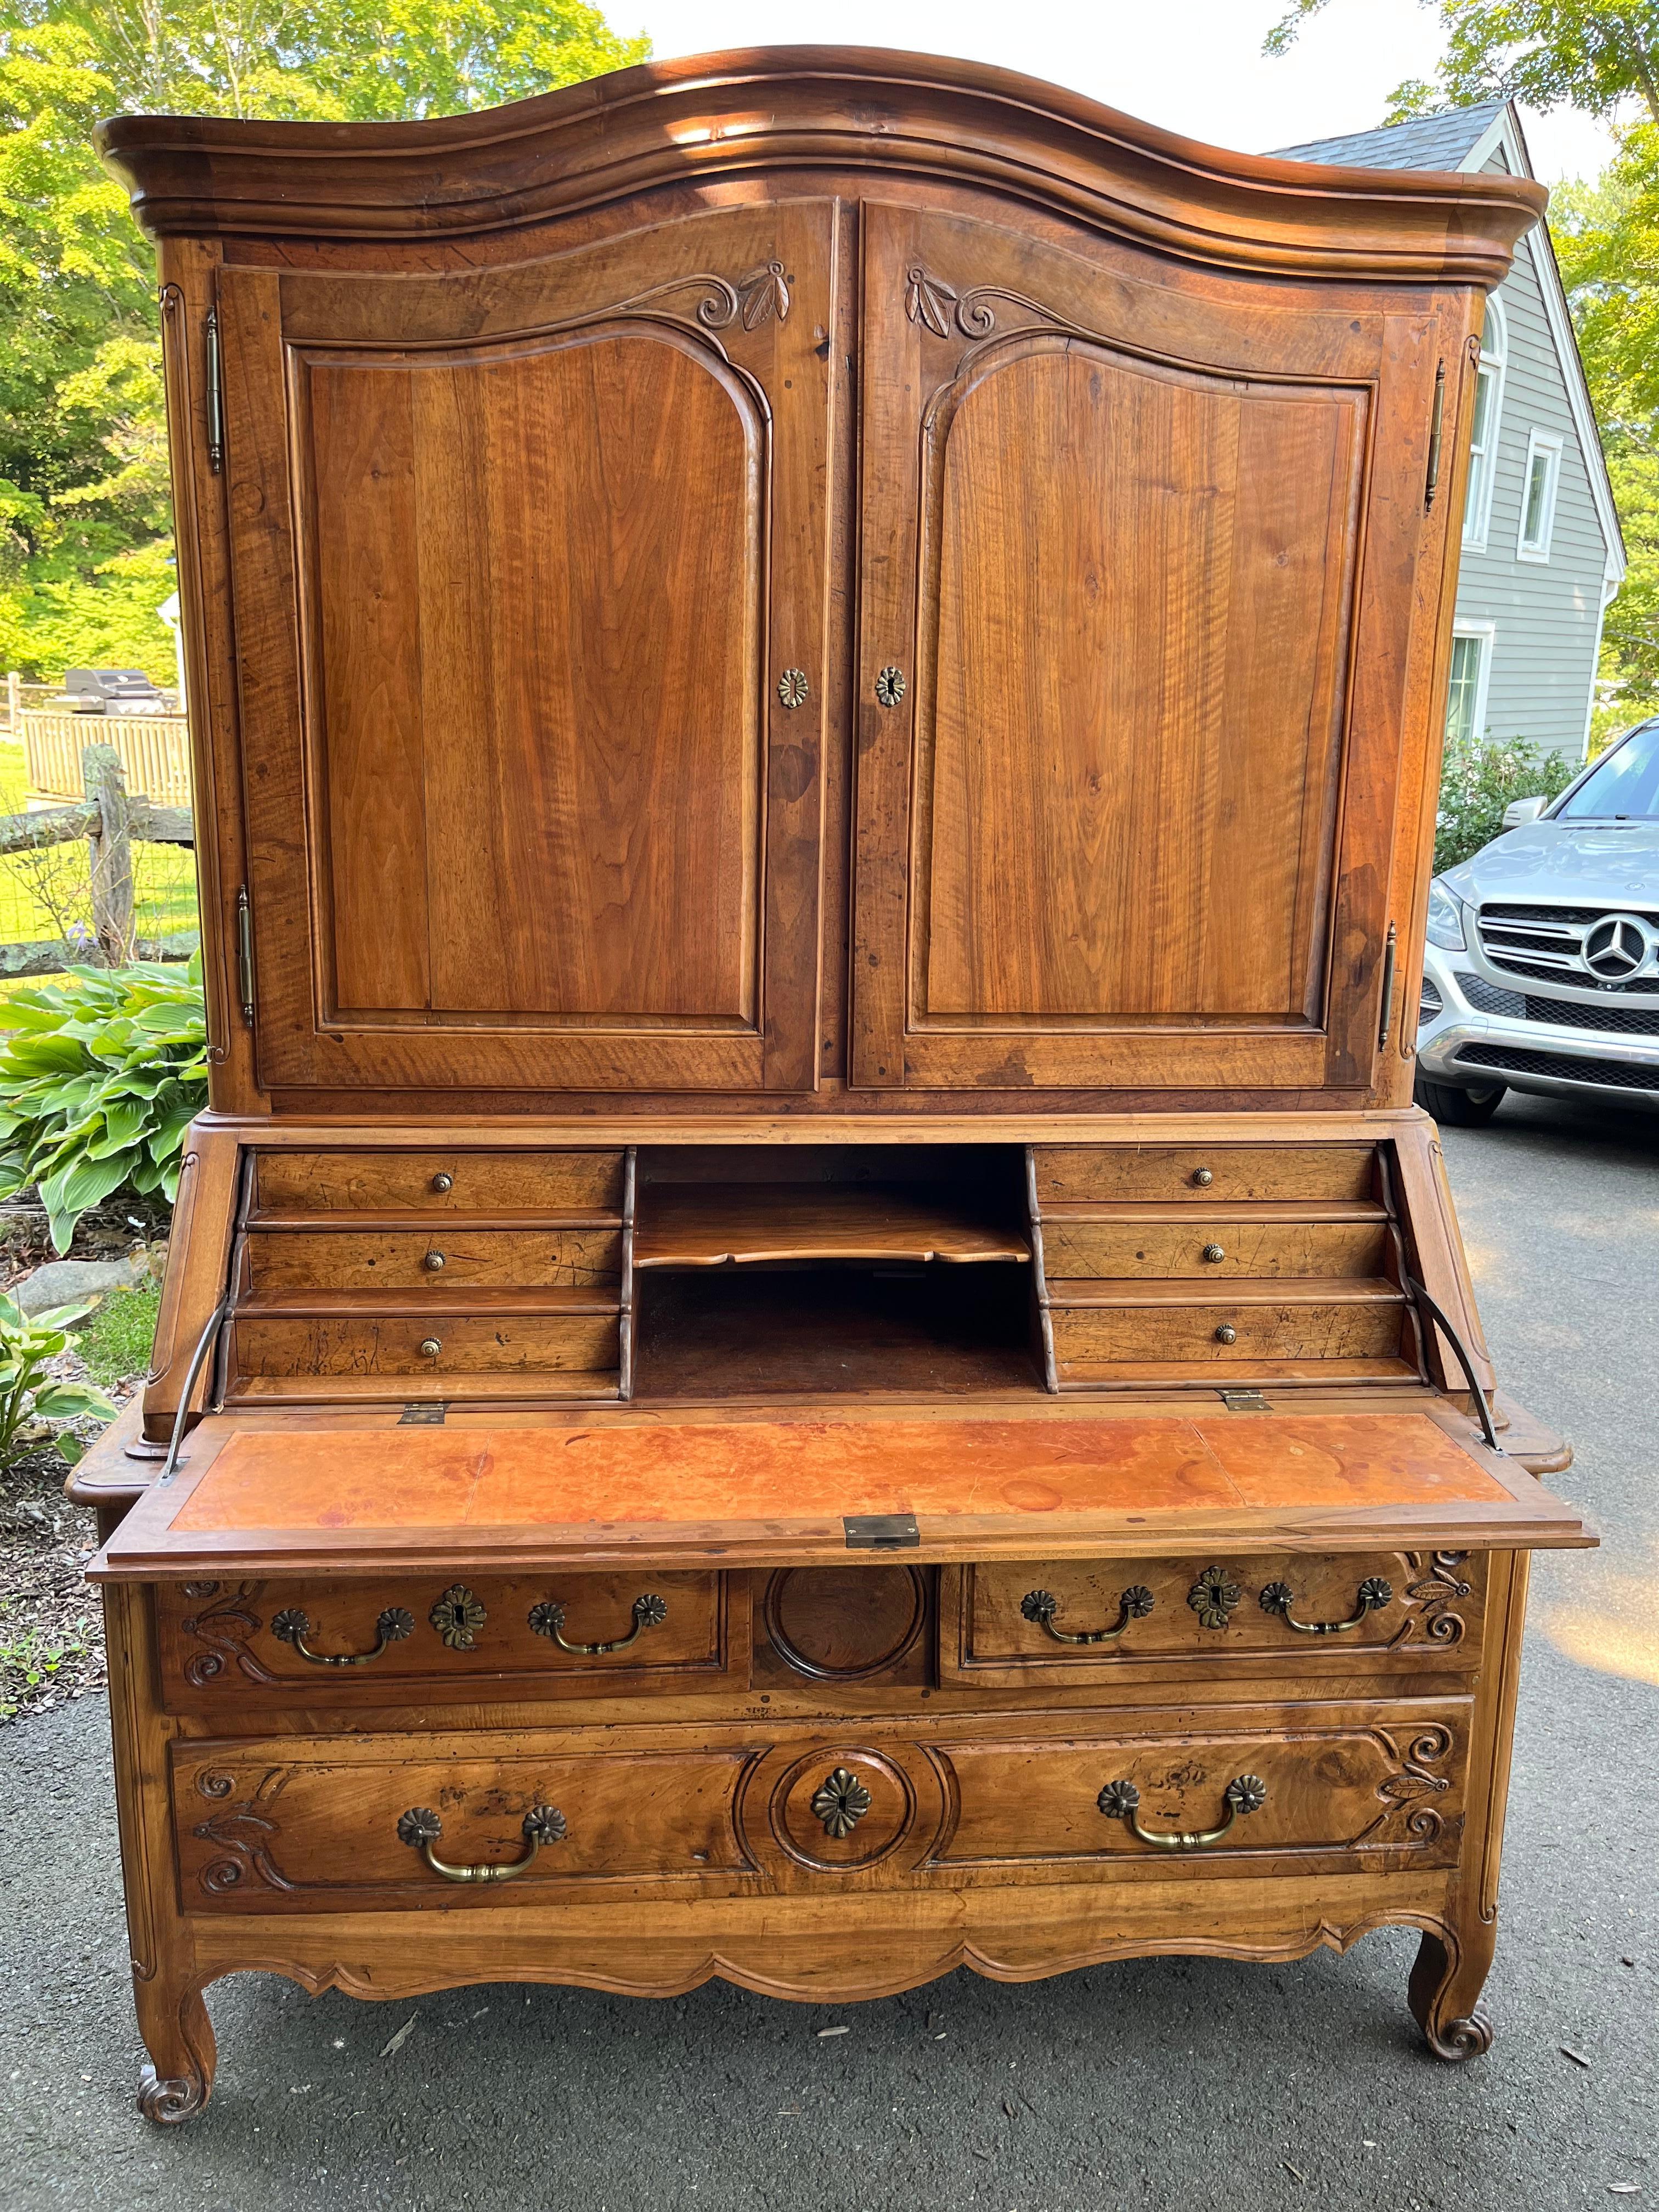 A very nice Louis XV slant-front secretaire desk in walnut, with a 3-drawer lower cabinet under a fitted fall-front desk with inset leather writing surface, under a 2-door arched cabinet top with molded crown. In three sections for easy moving.